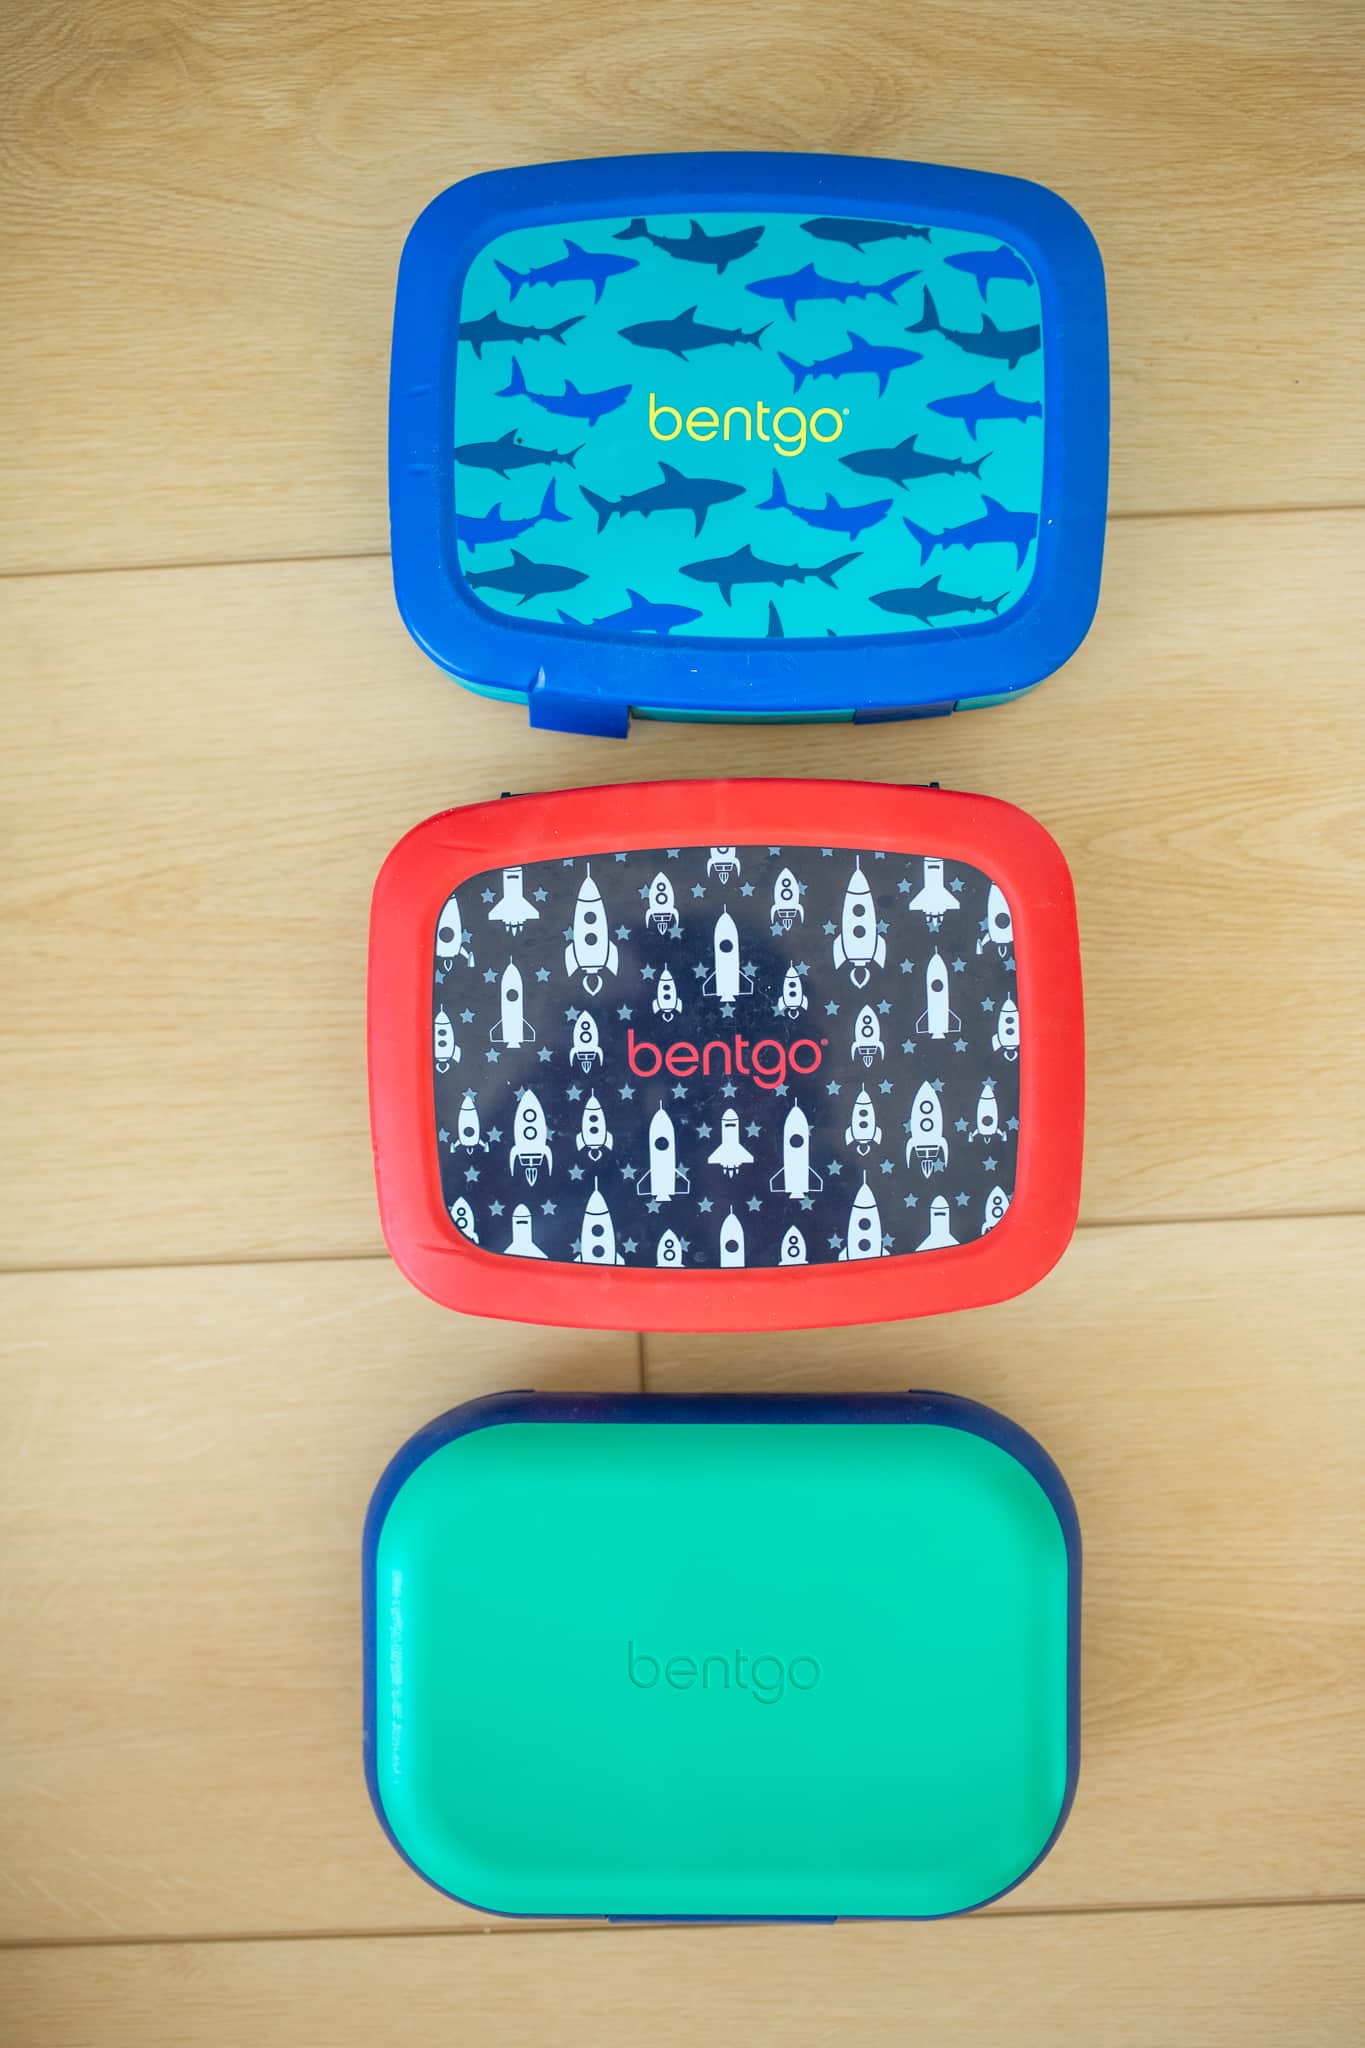 Types of Bentgo Lunchboxes including Bentgo Kids and Bentgo Chill lunchboxes in a row. 